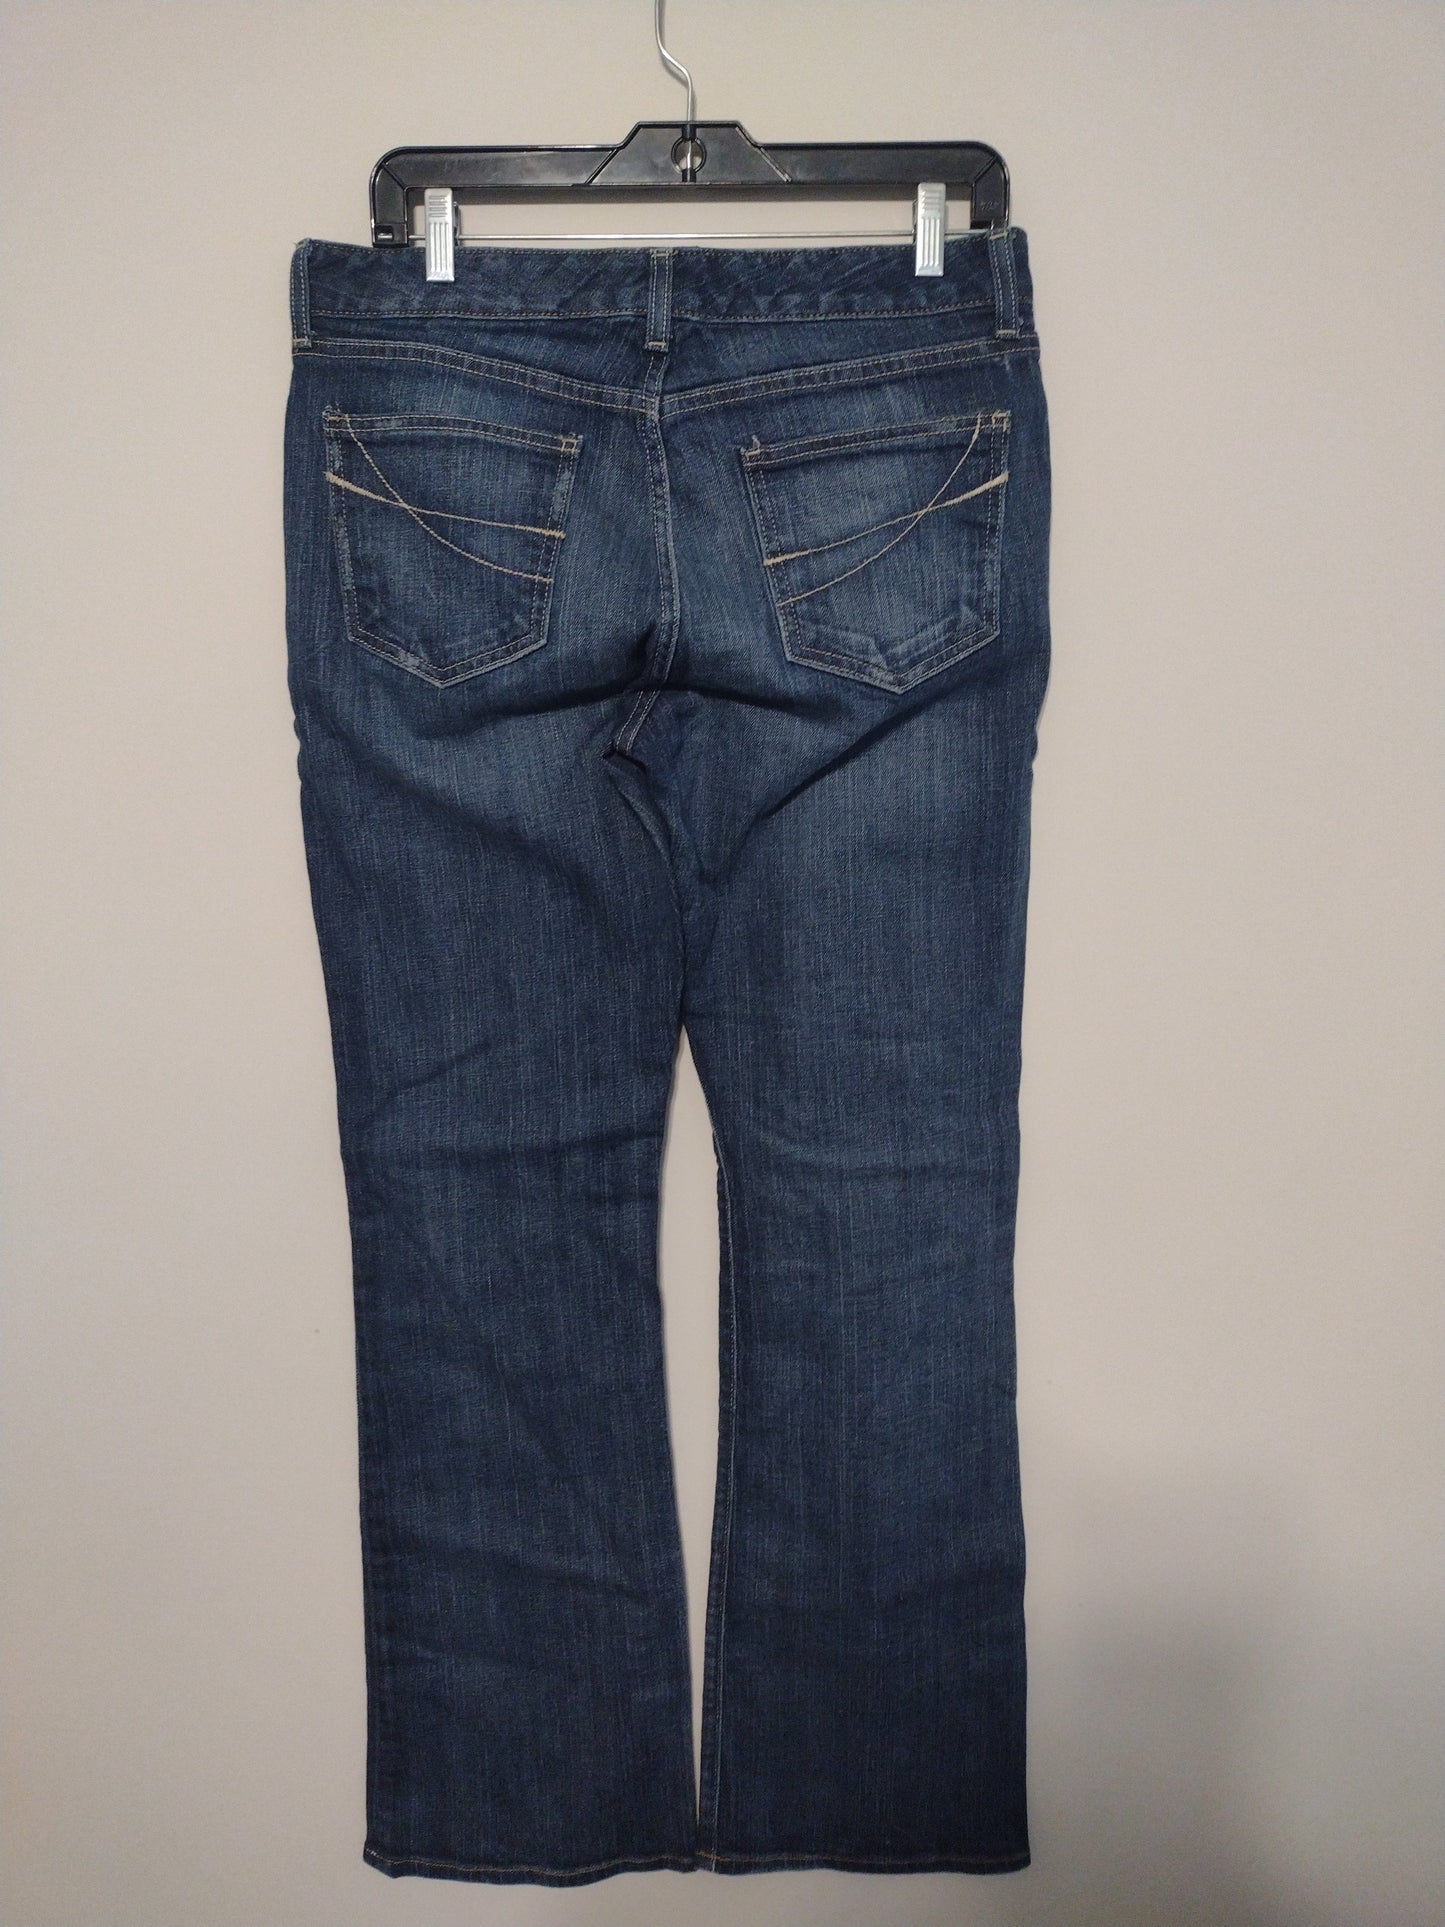 Jeans Boot Cut By Gap  Size: 12